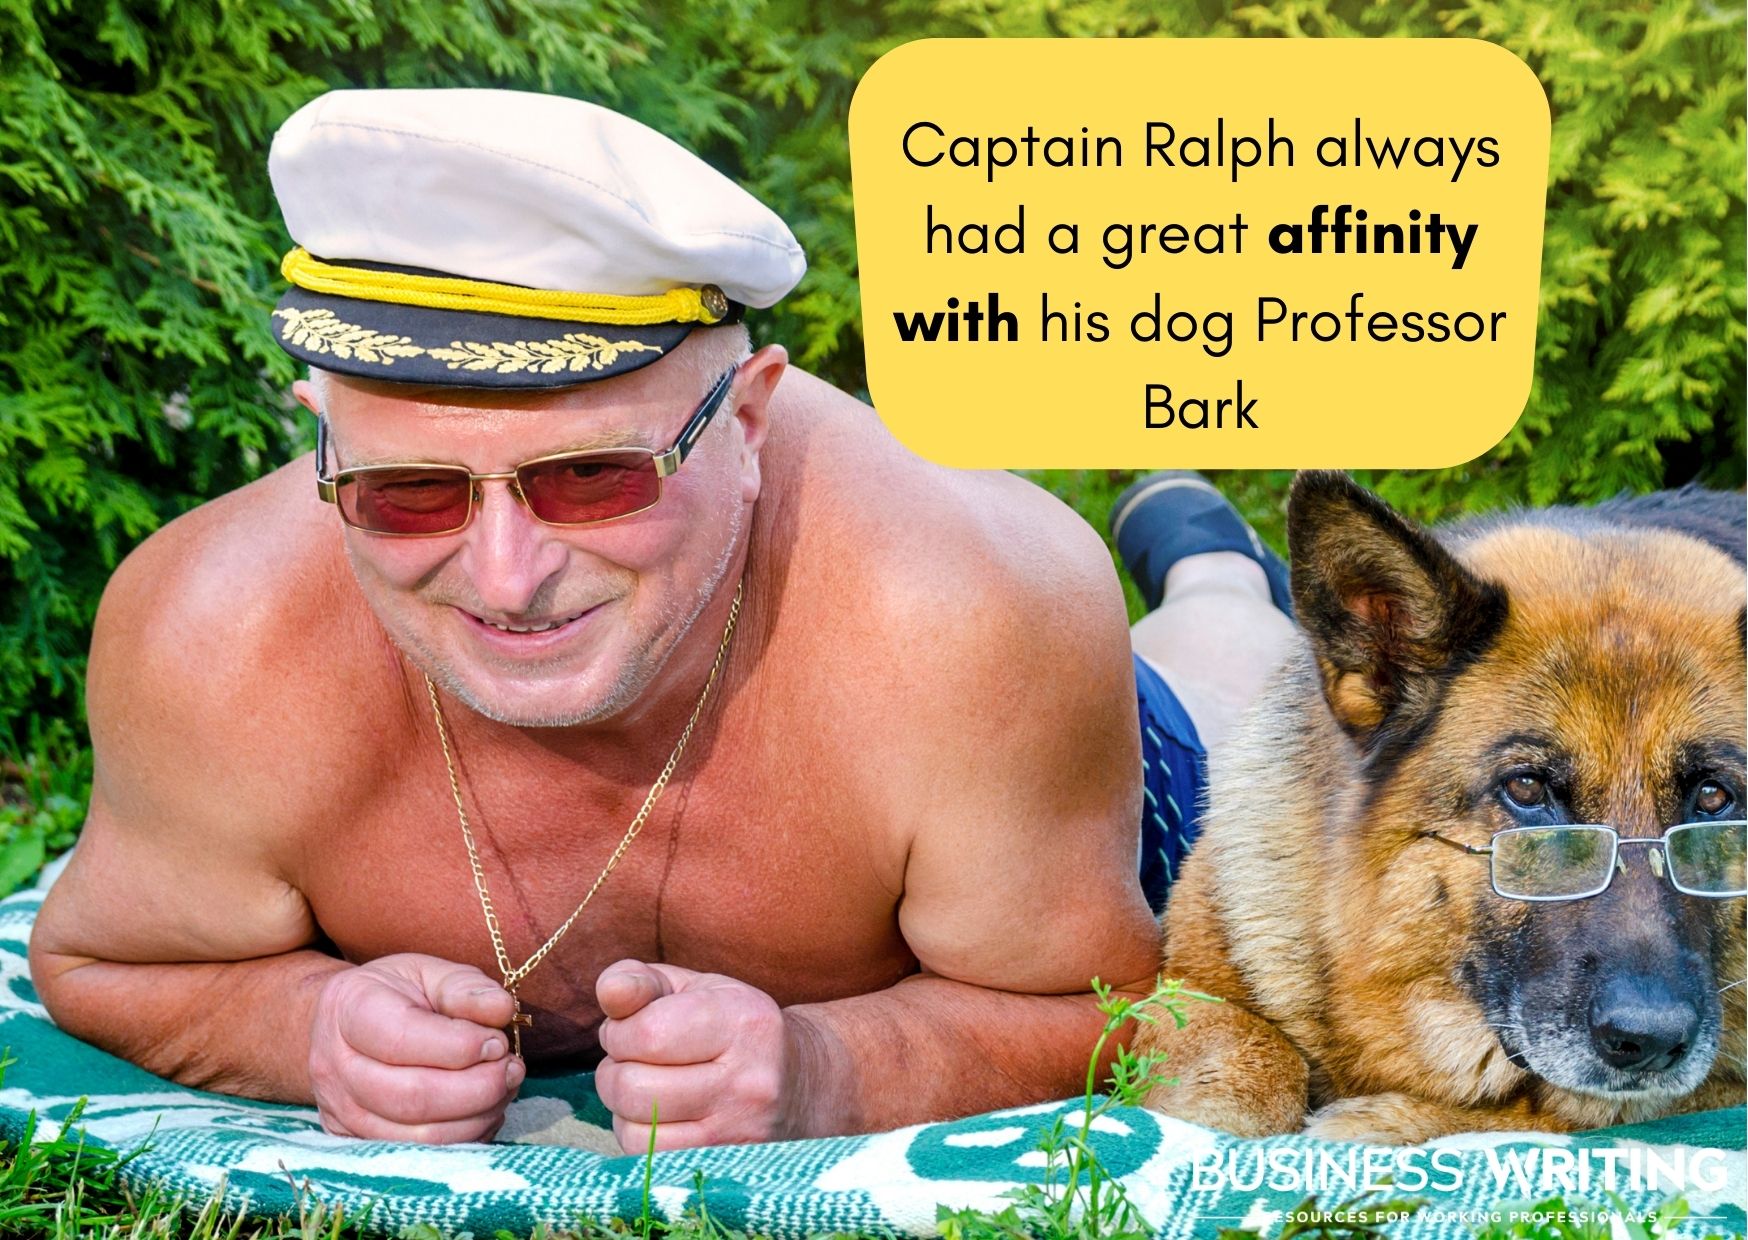 Graphic of a man with a dog and a sentence: "Captain Ralph always had a great affinity with his dog Professor Bark"